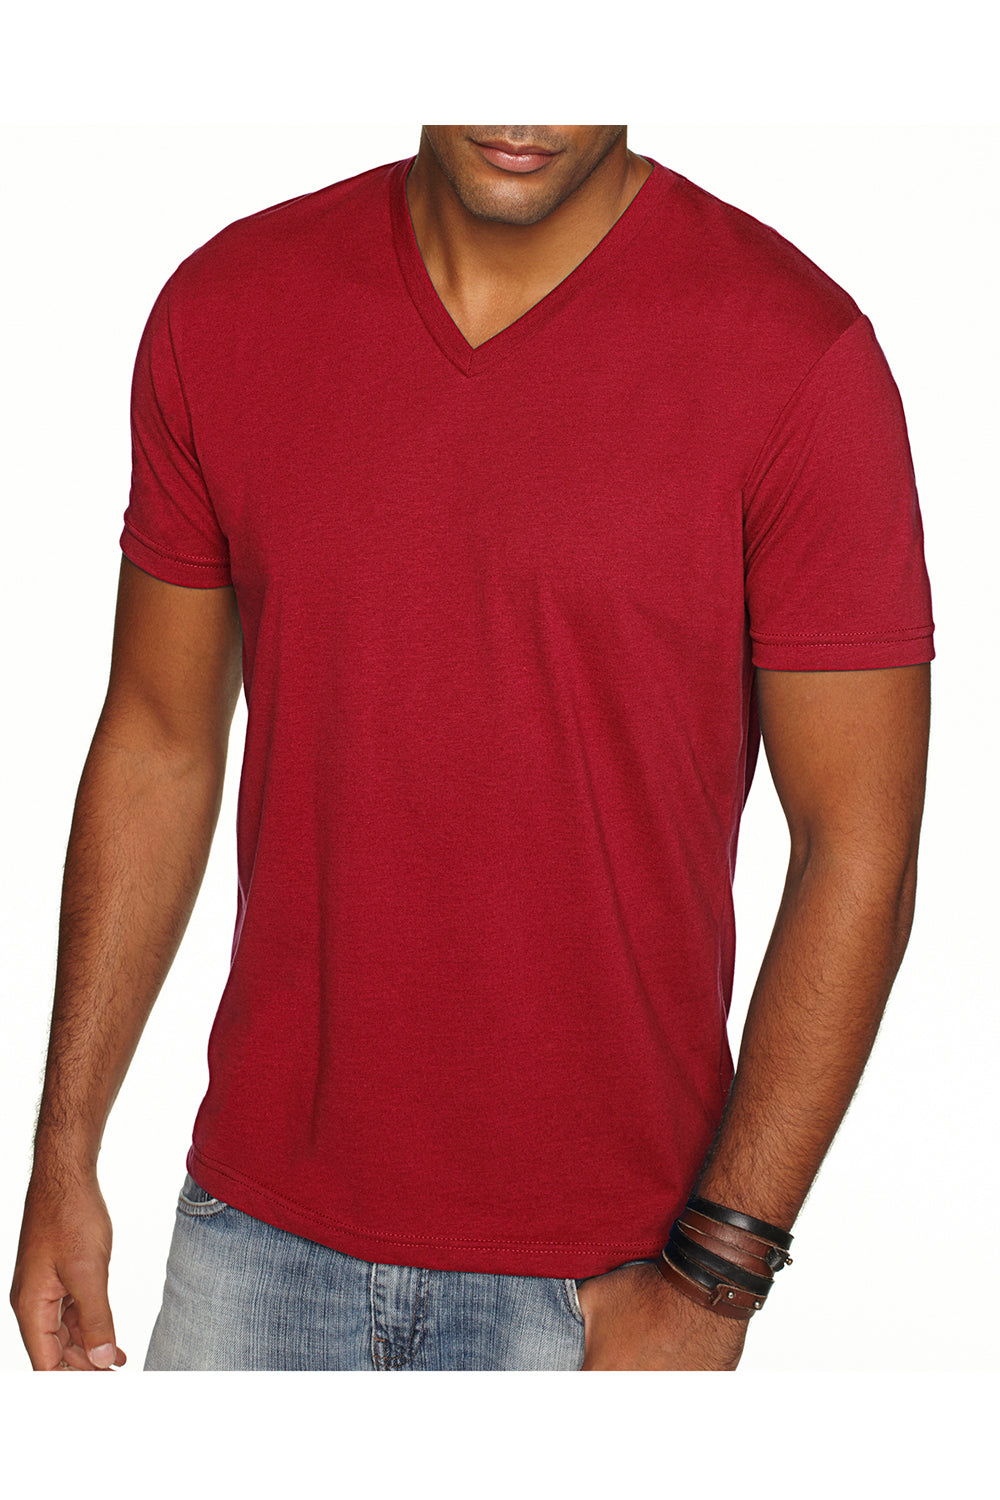 Next Level 6440 Mens Sueded Jersey Short Sleeve V-Neck T-Shirt Cardinal Red Front